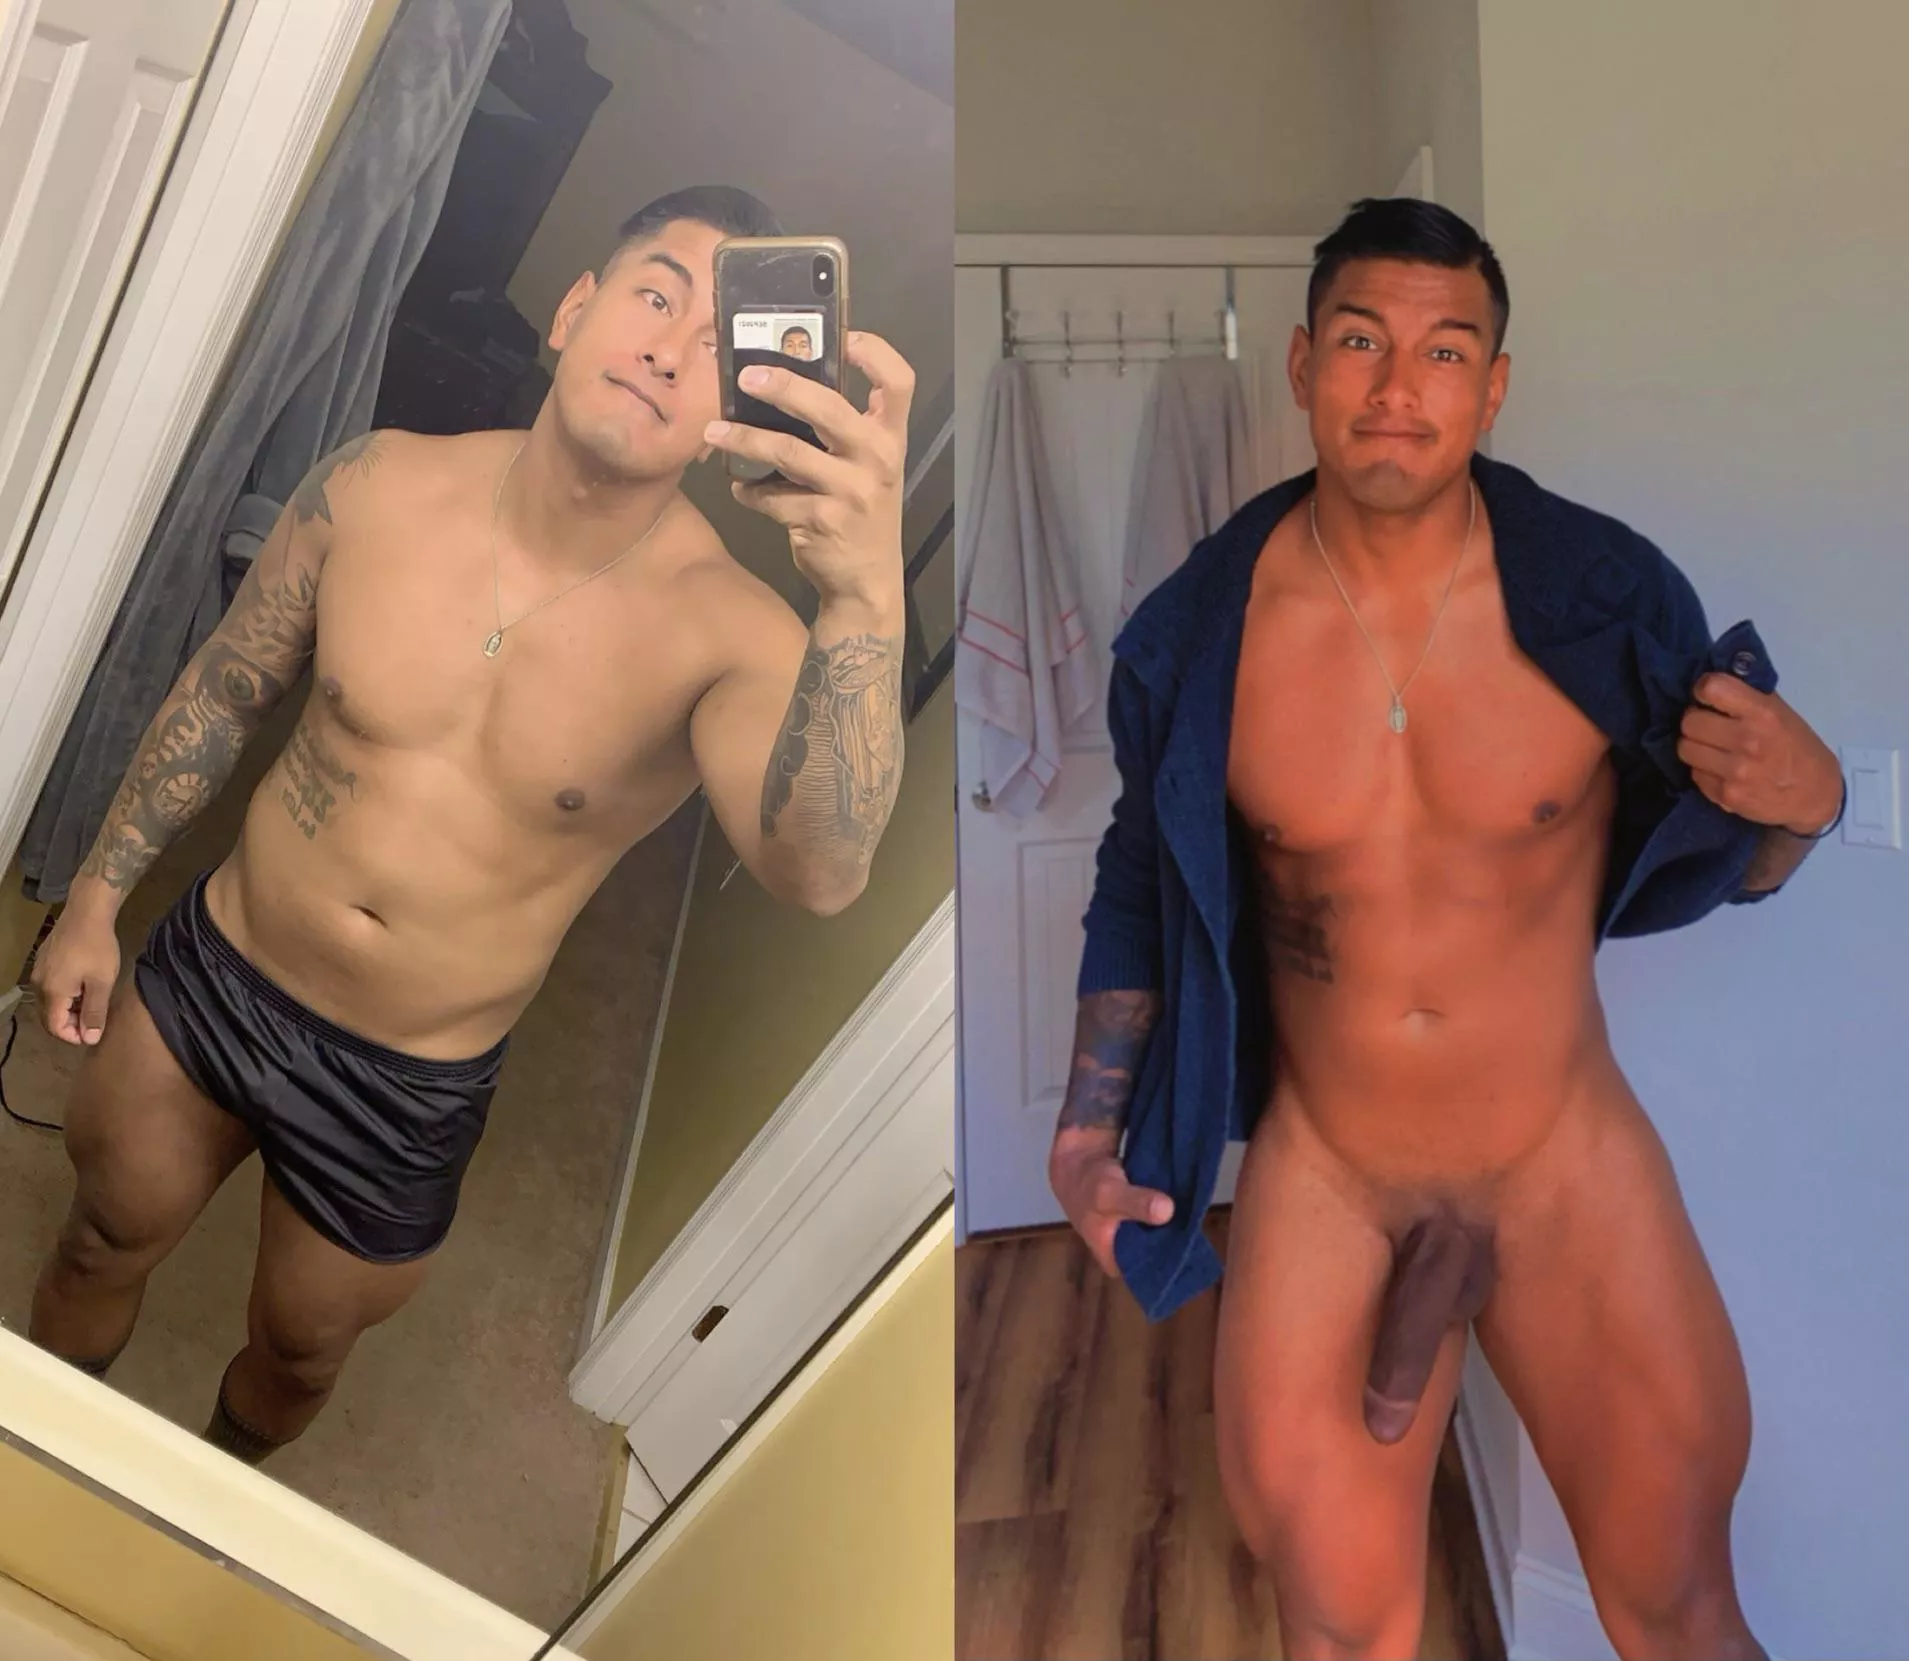 [m] what do y’all think of my transformation? posted by Hayden327